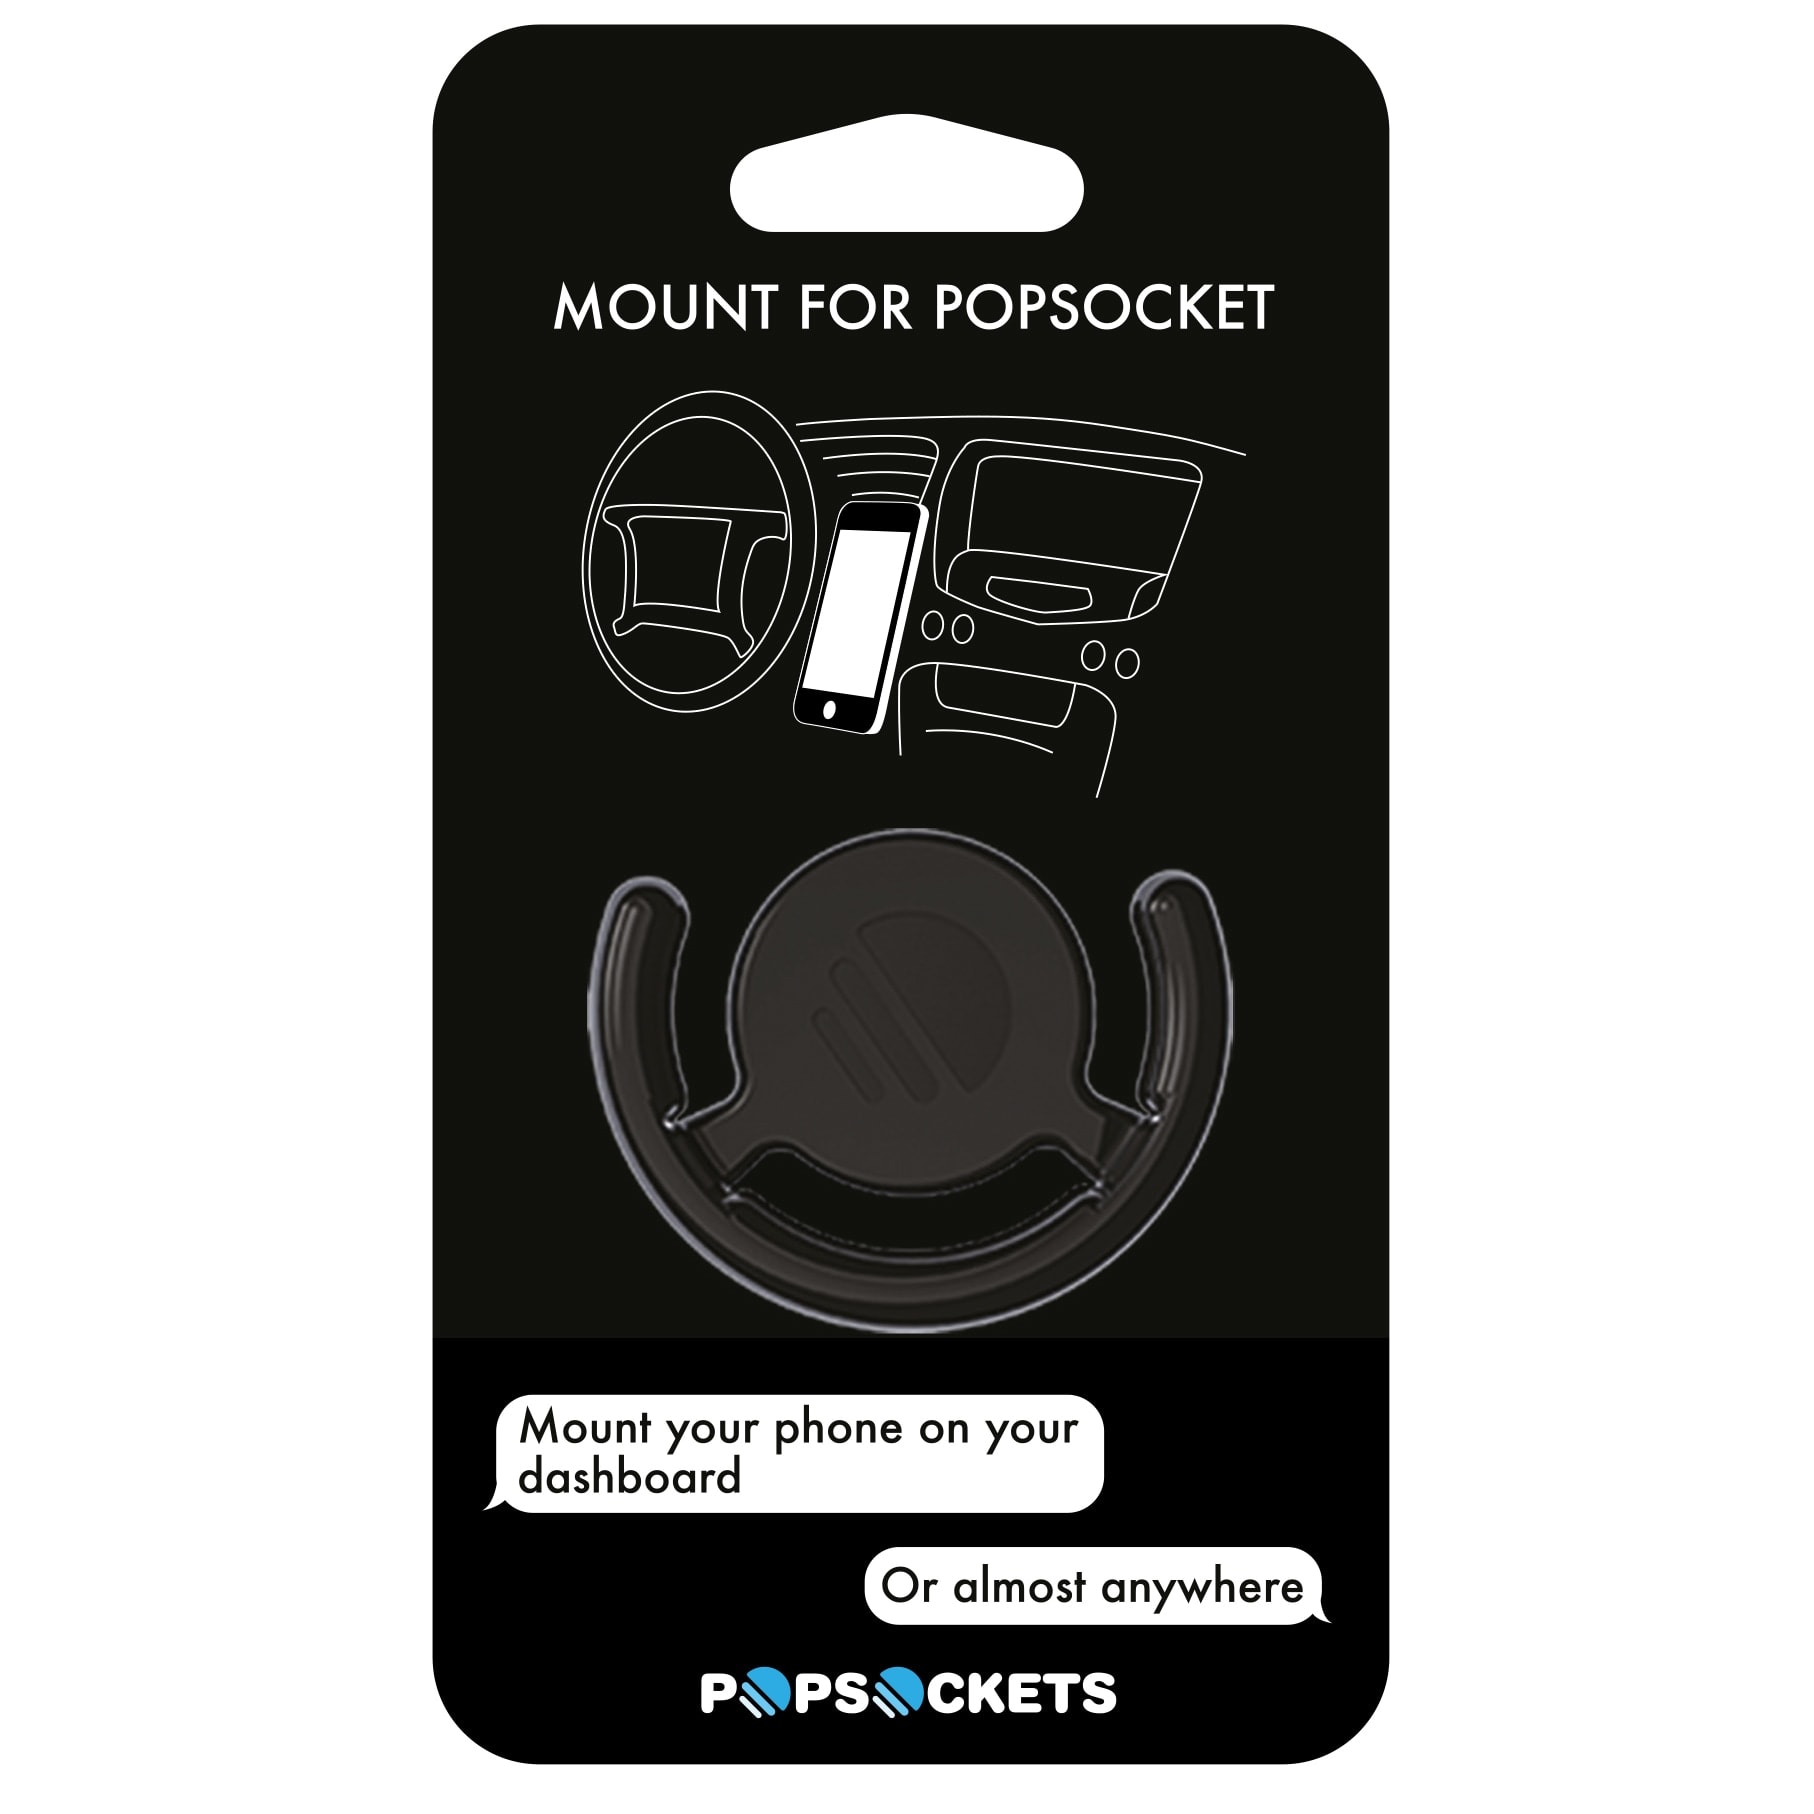 how to put on a popsocket and popclip